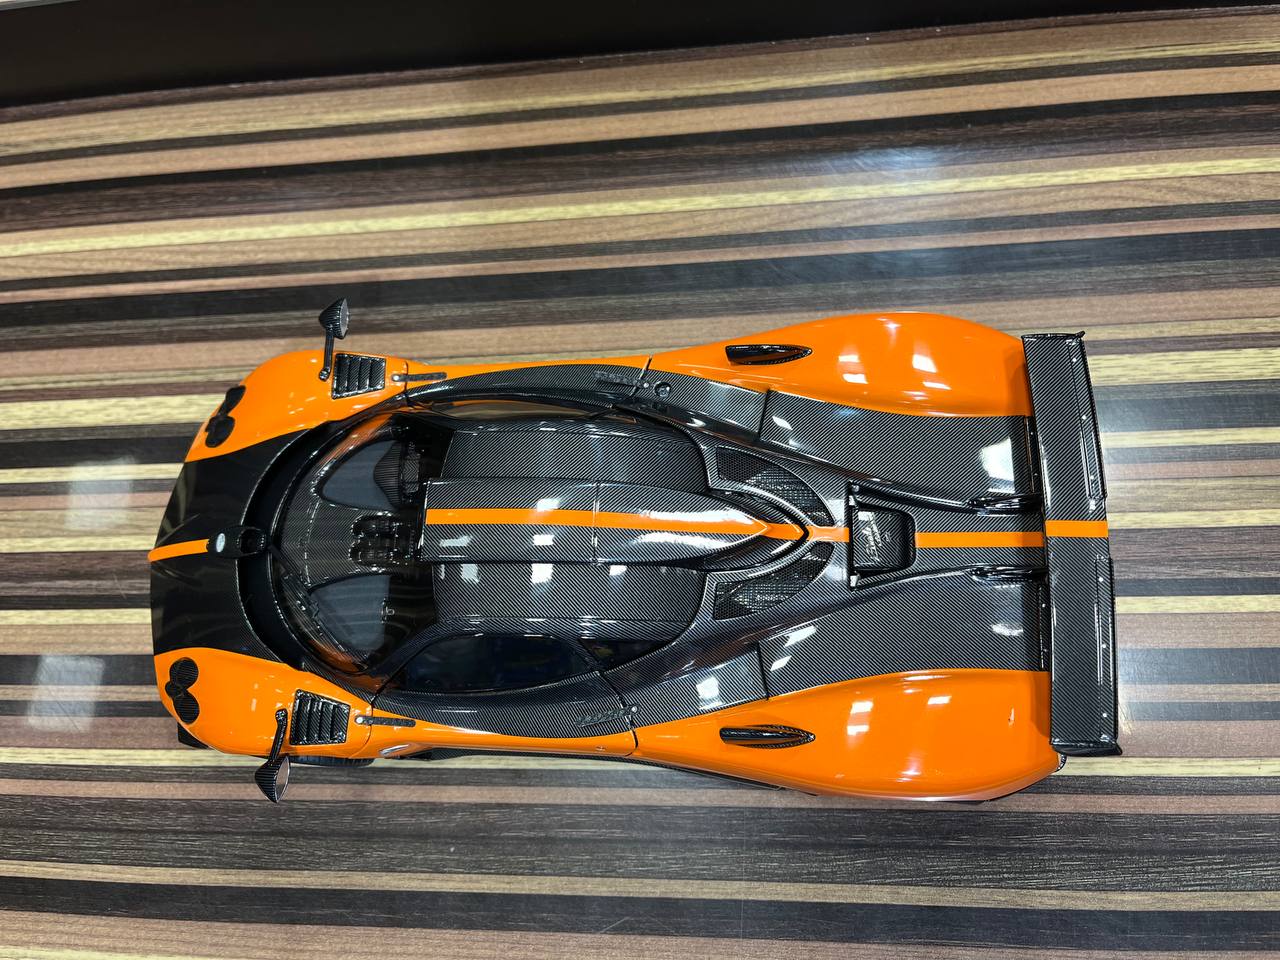 Almost Real Pagani Zonda F - 1/18 Diecast Model, All Opening - Orange/Carbon